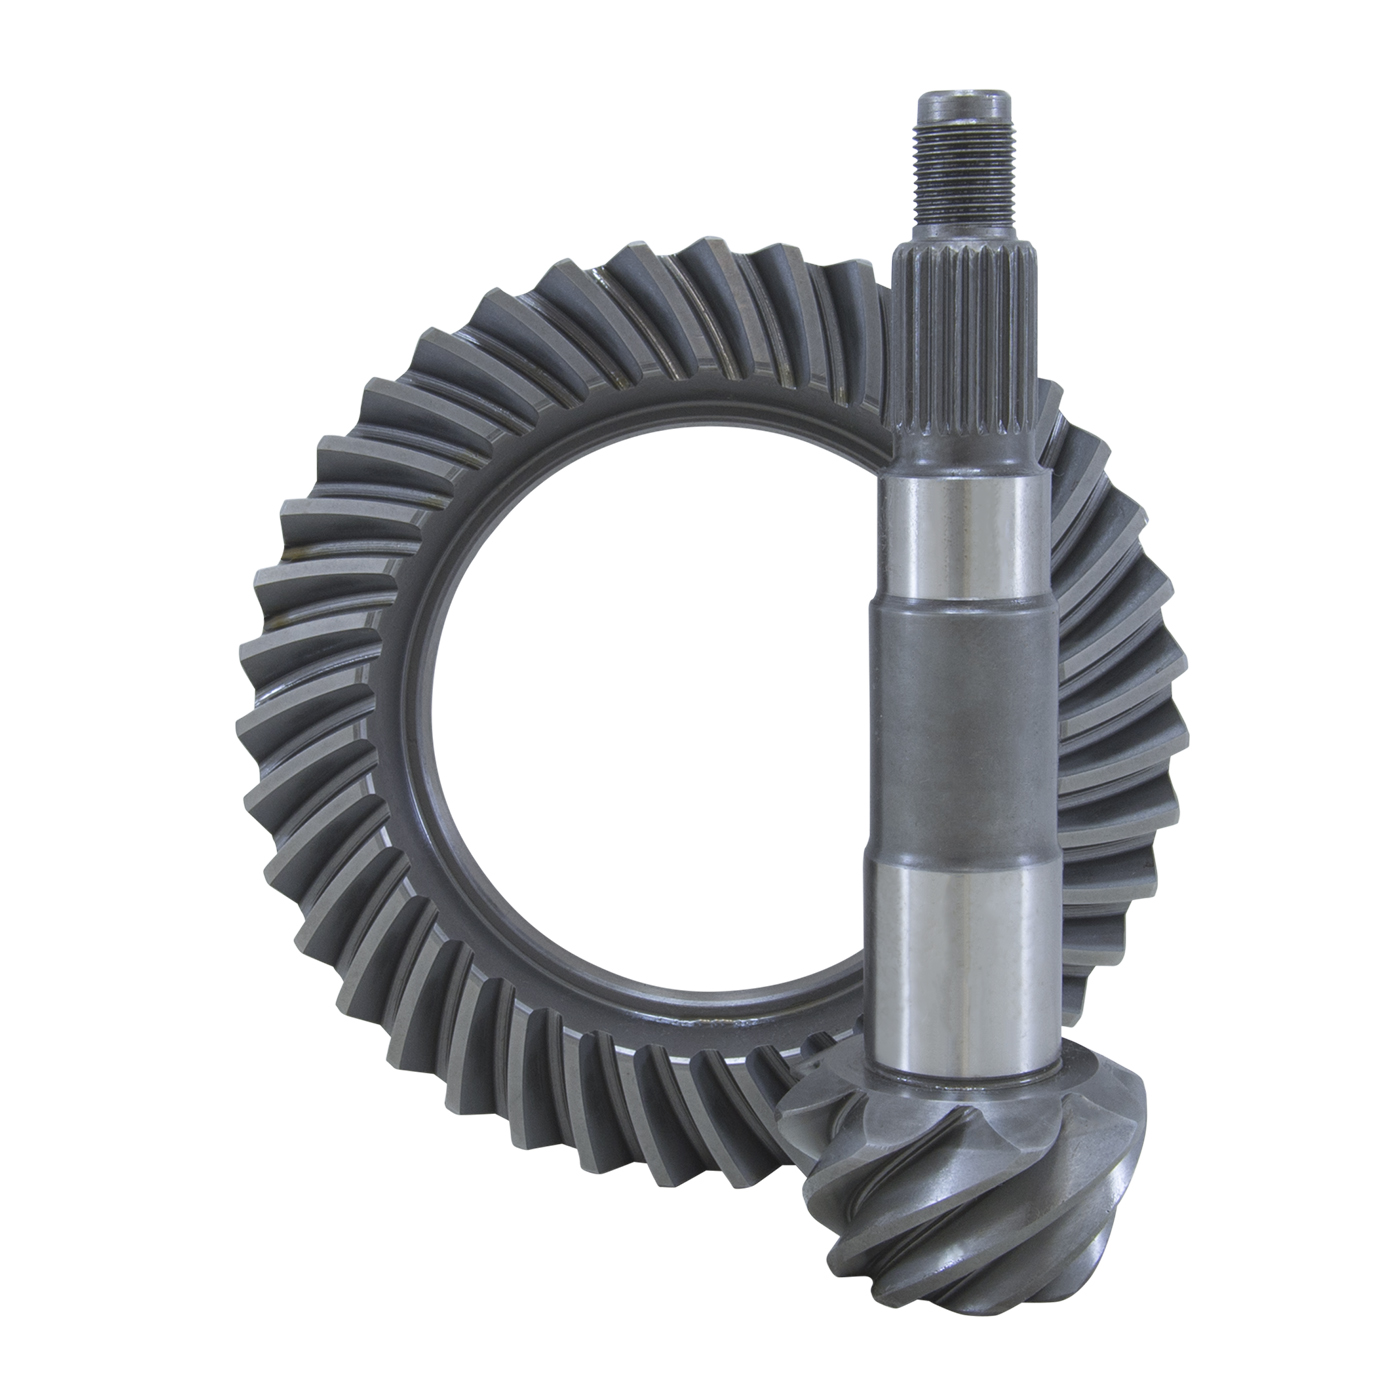 USA Standard 36245 Ring & Pinion Gear Set, For Toyota 7.5 in. Reverse Rotation, 4.56 Ratio